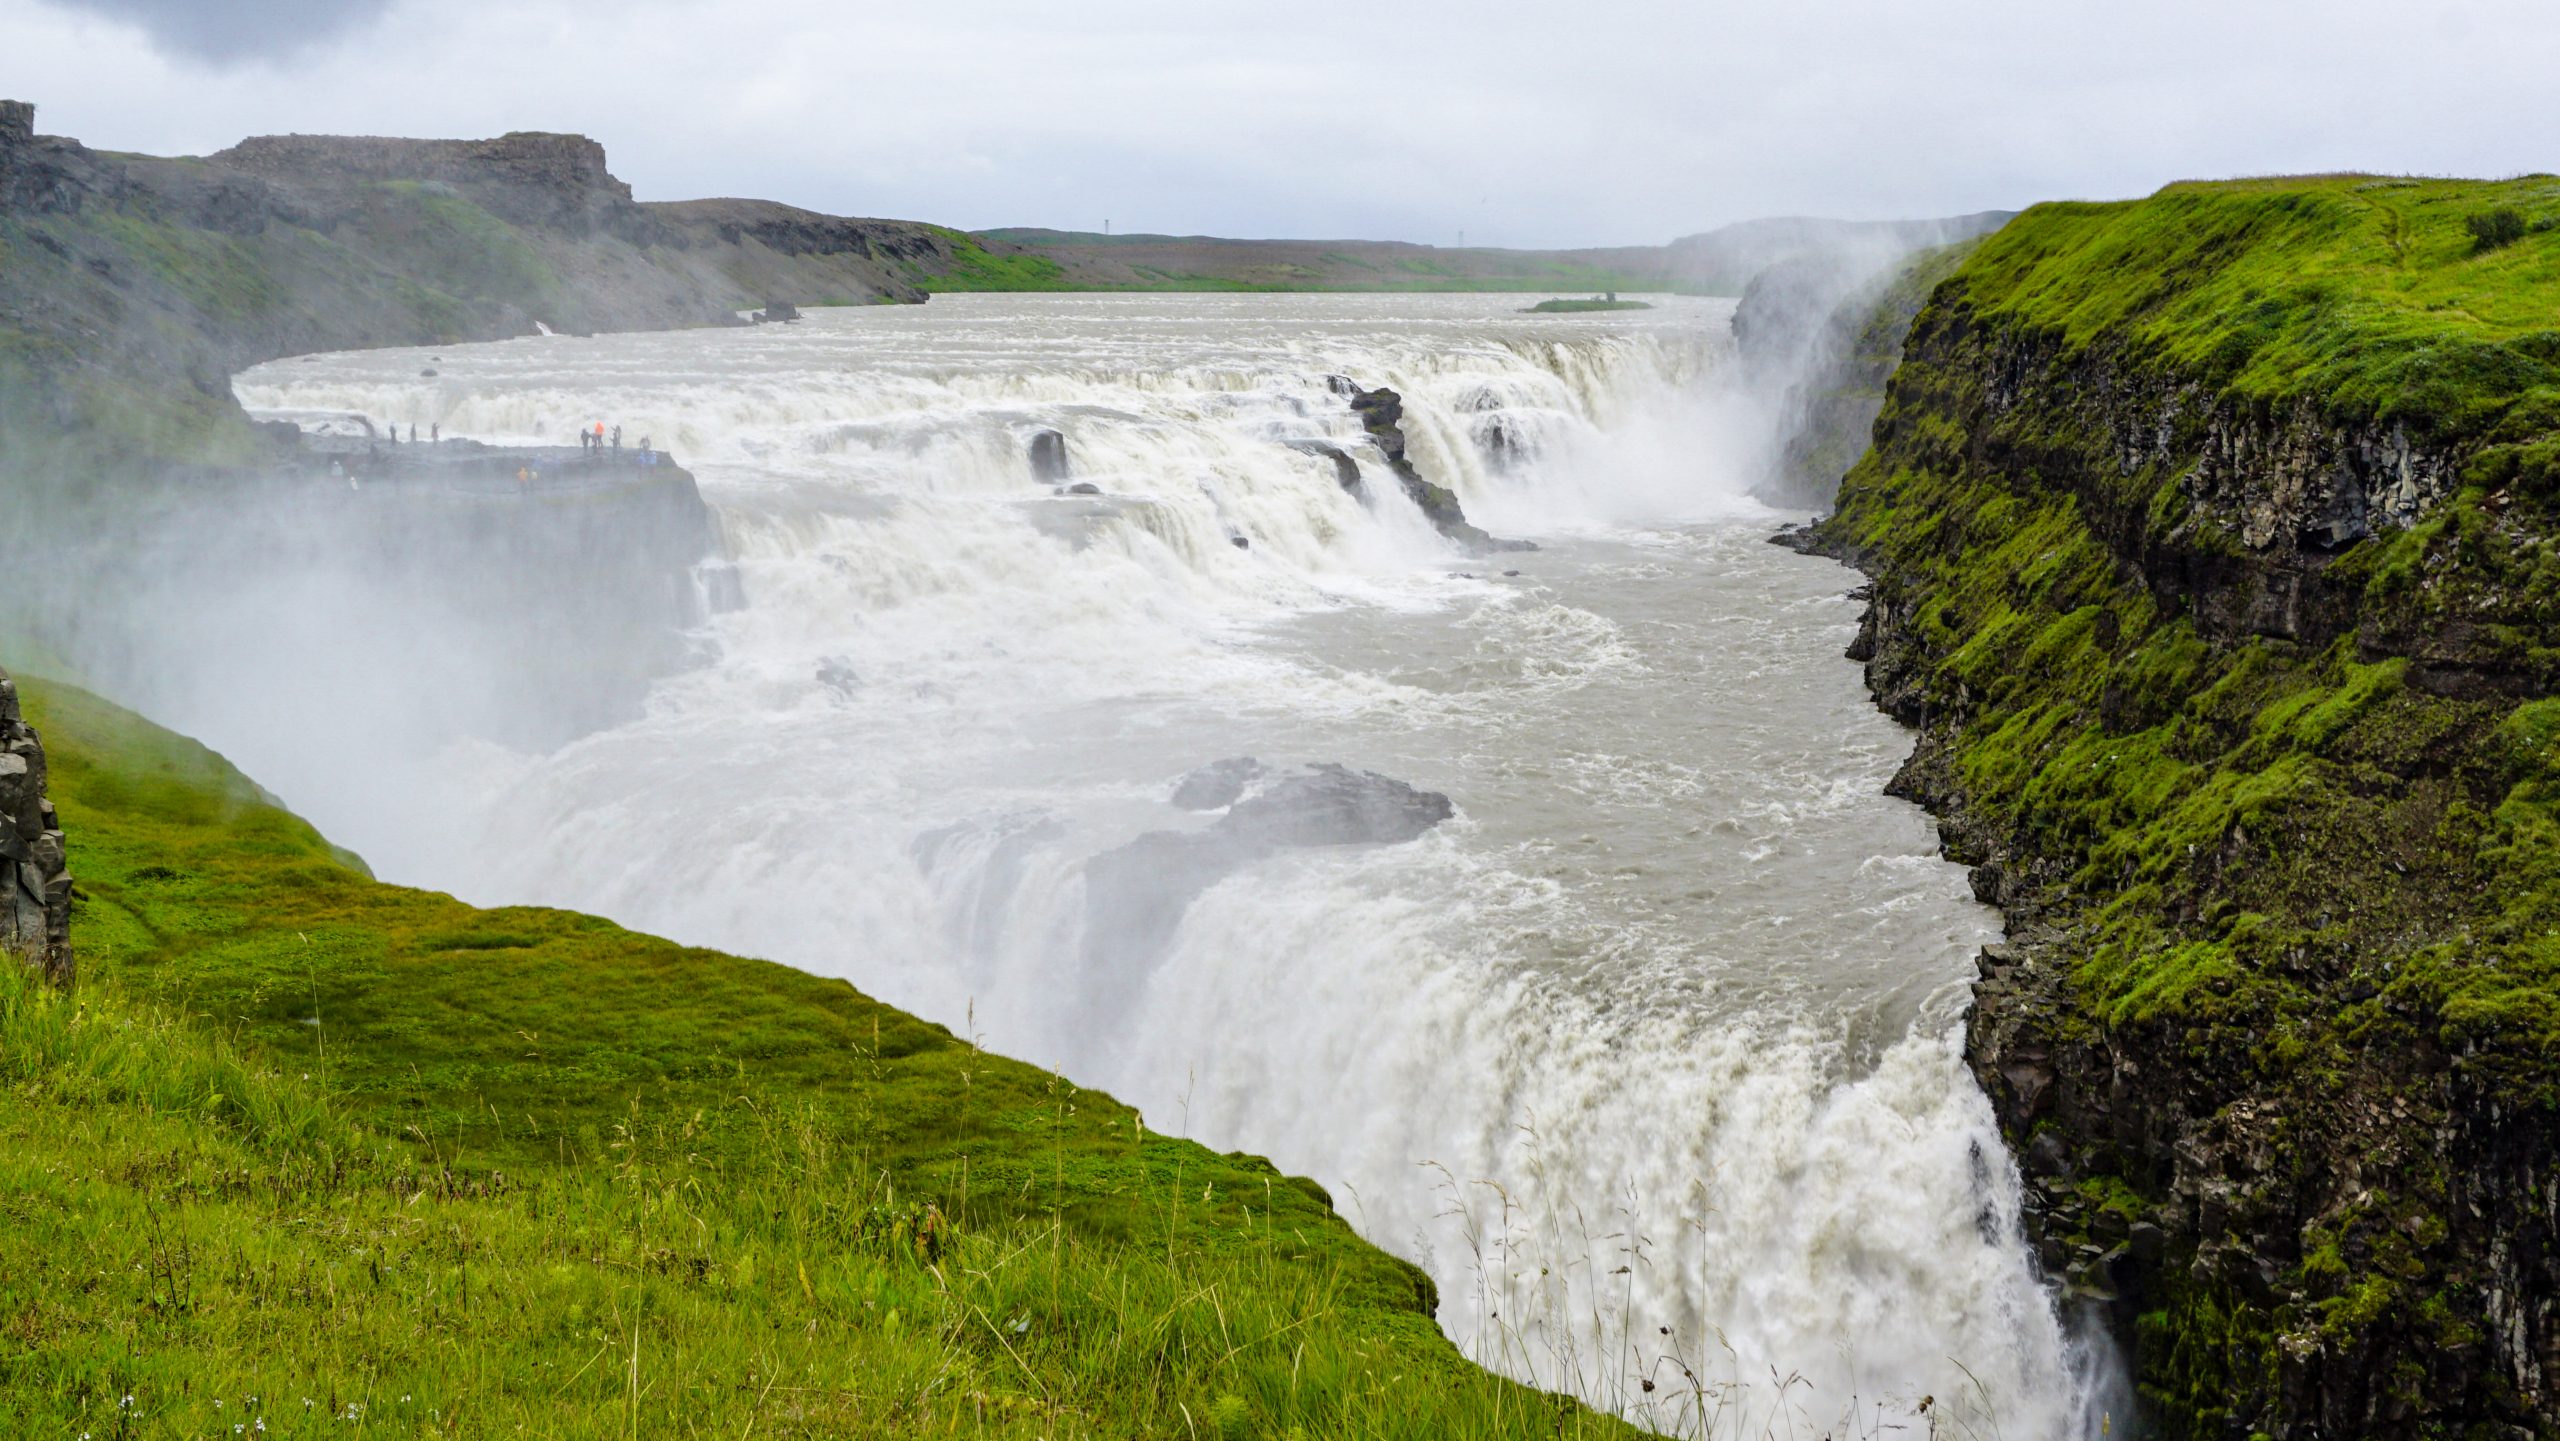 Impressive view of Gullfoss that should be included in all Iceland Itineraries